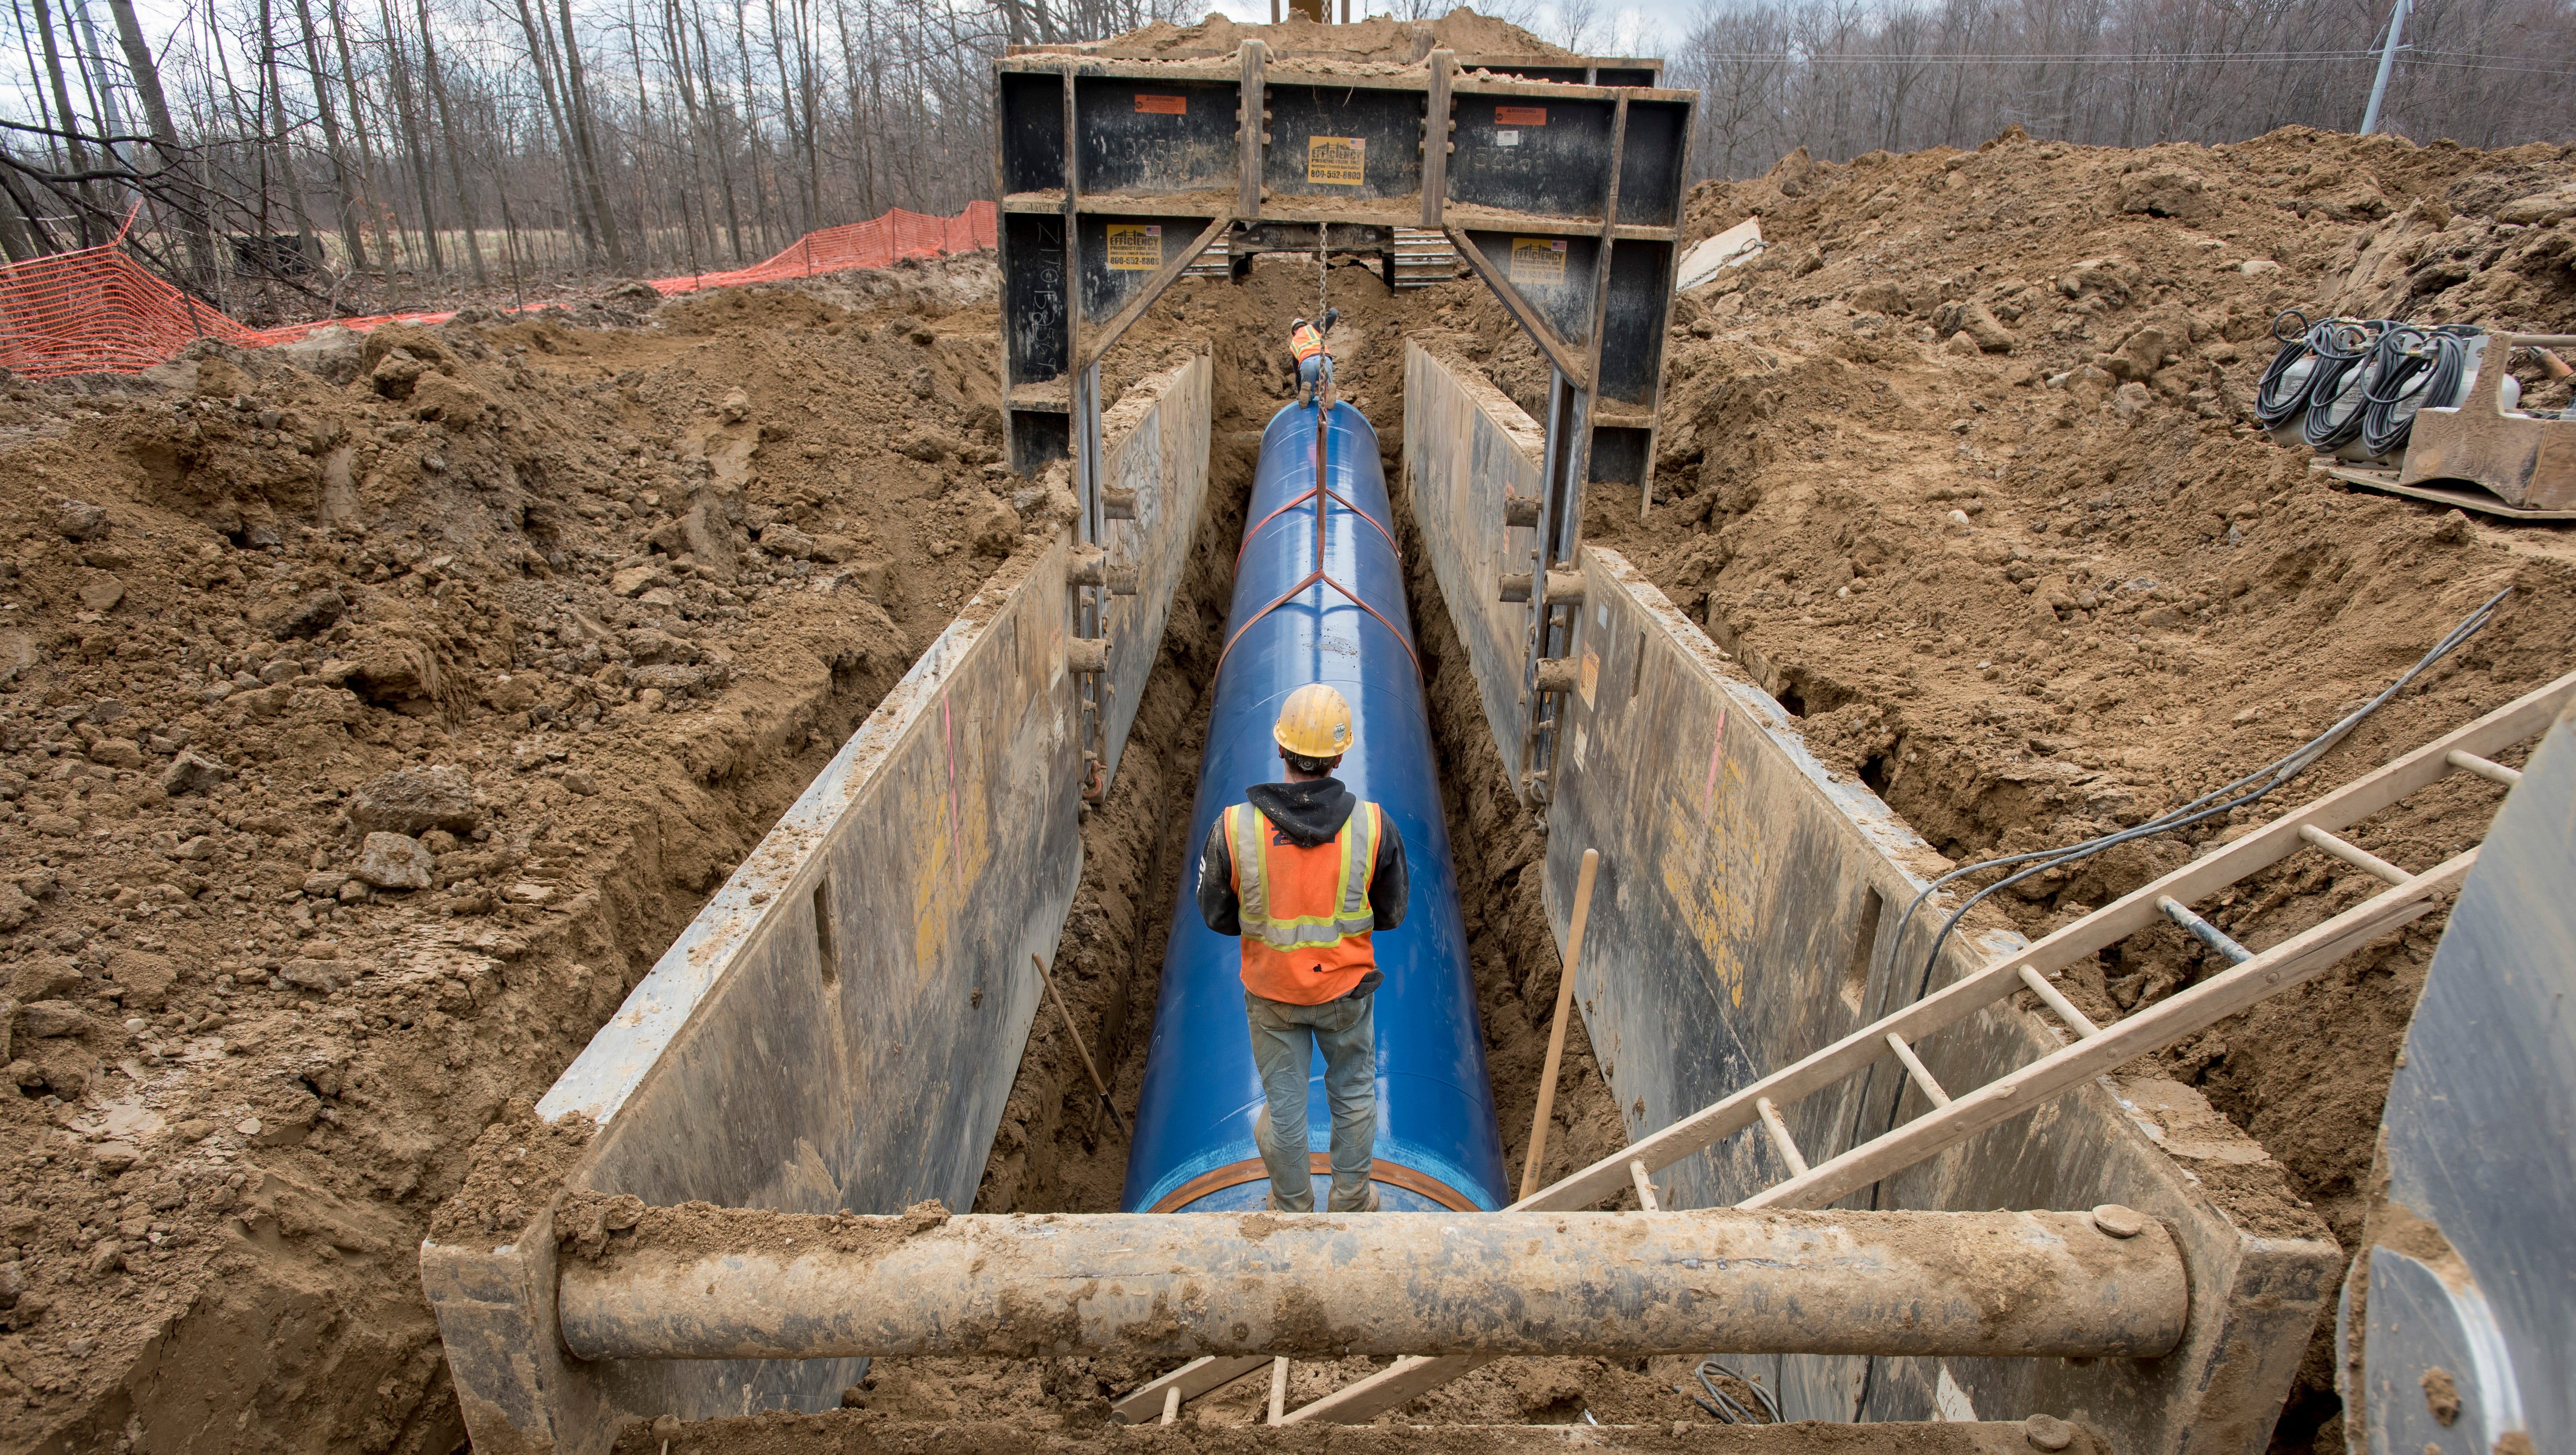 Laborers work on inserting a 50-foot section of the Karegnondi Water Authority pipeline near Oregon Township.